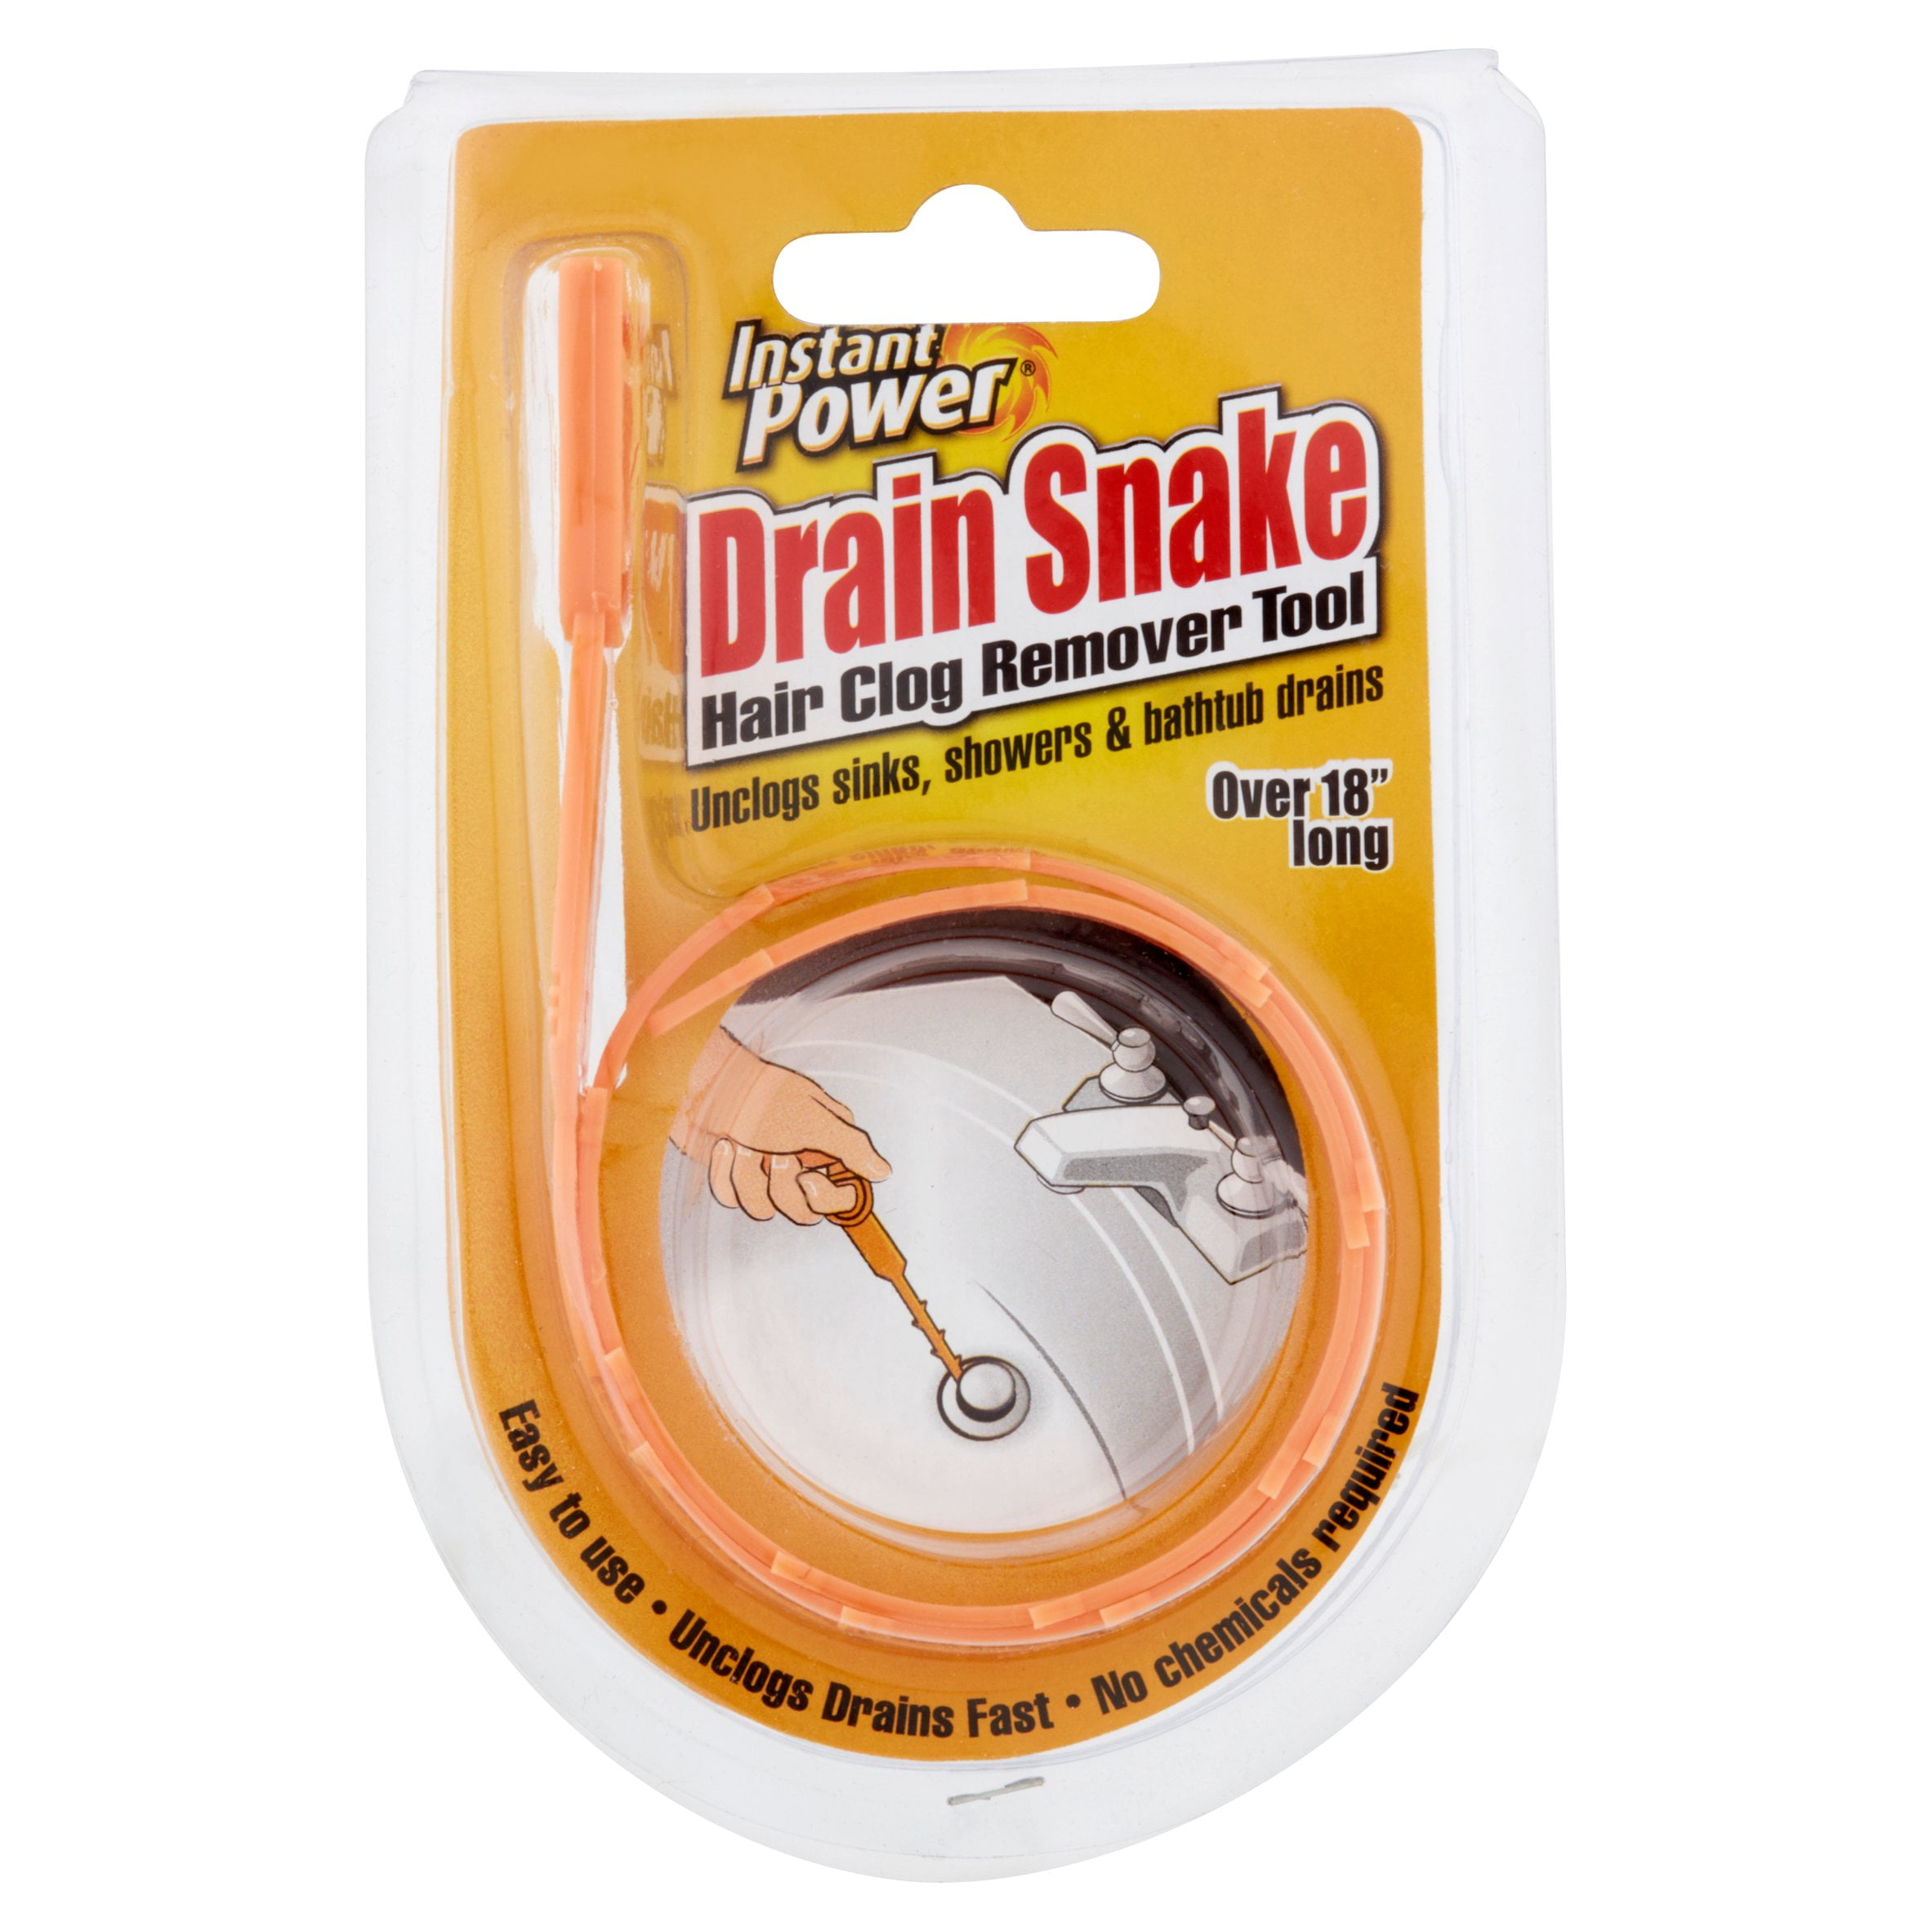 The BEST Drain Snake you can get your hands on Easily removes clogs and hair! 